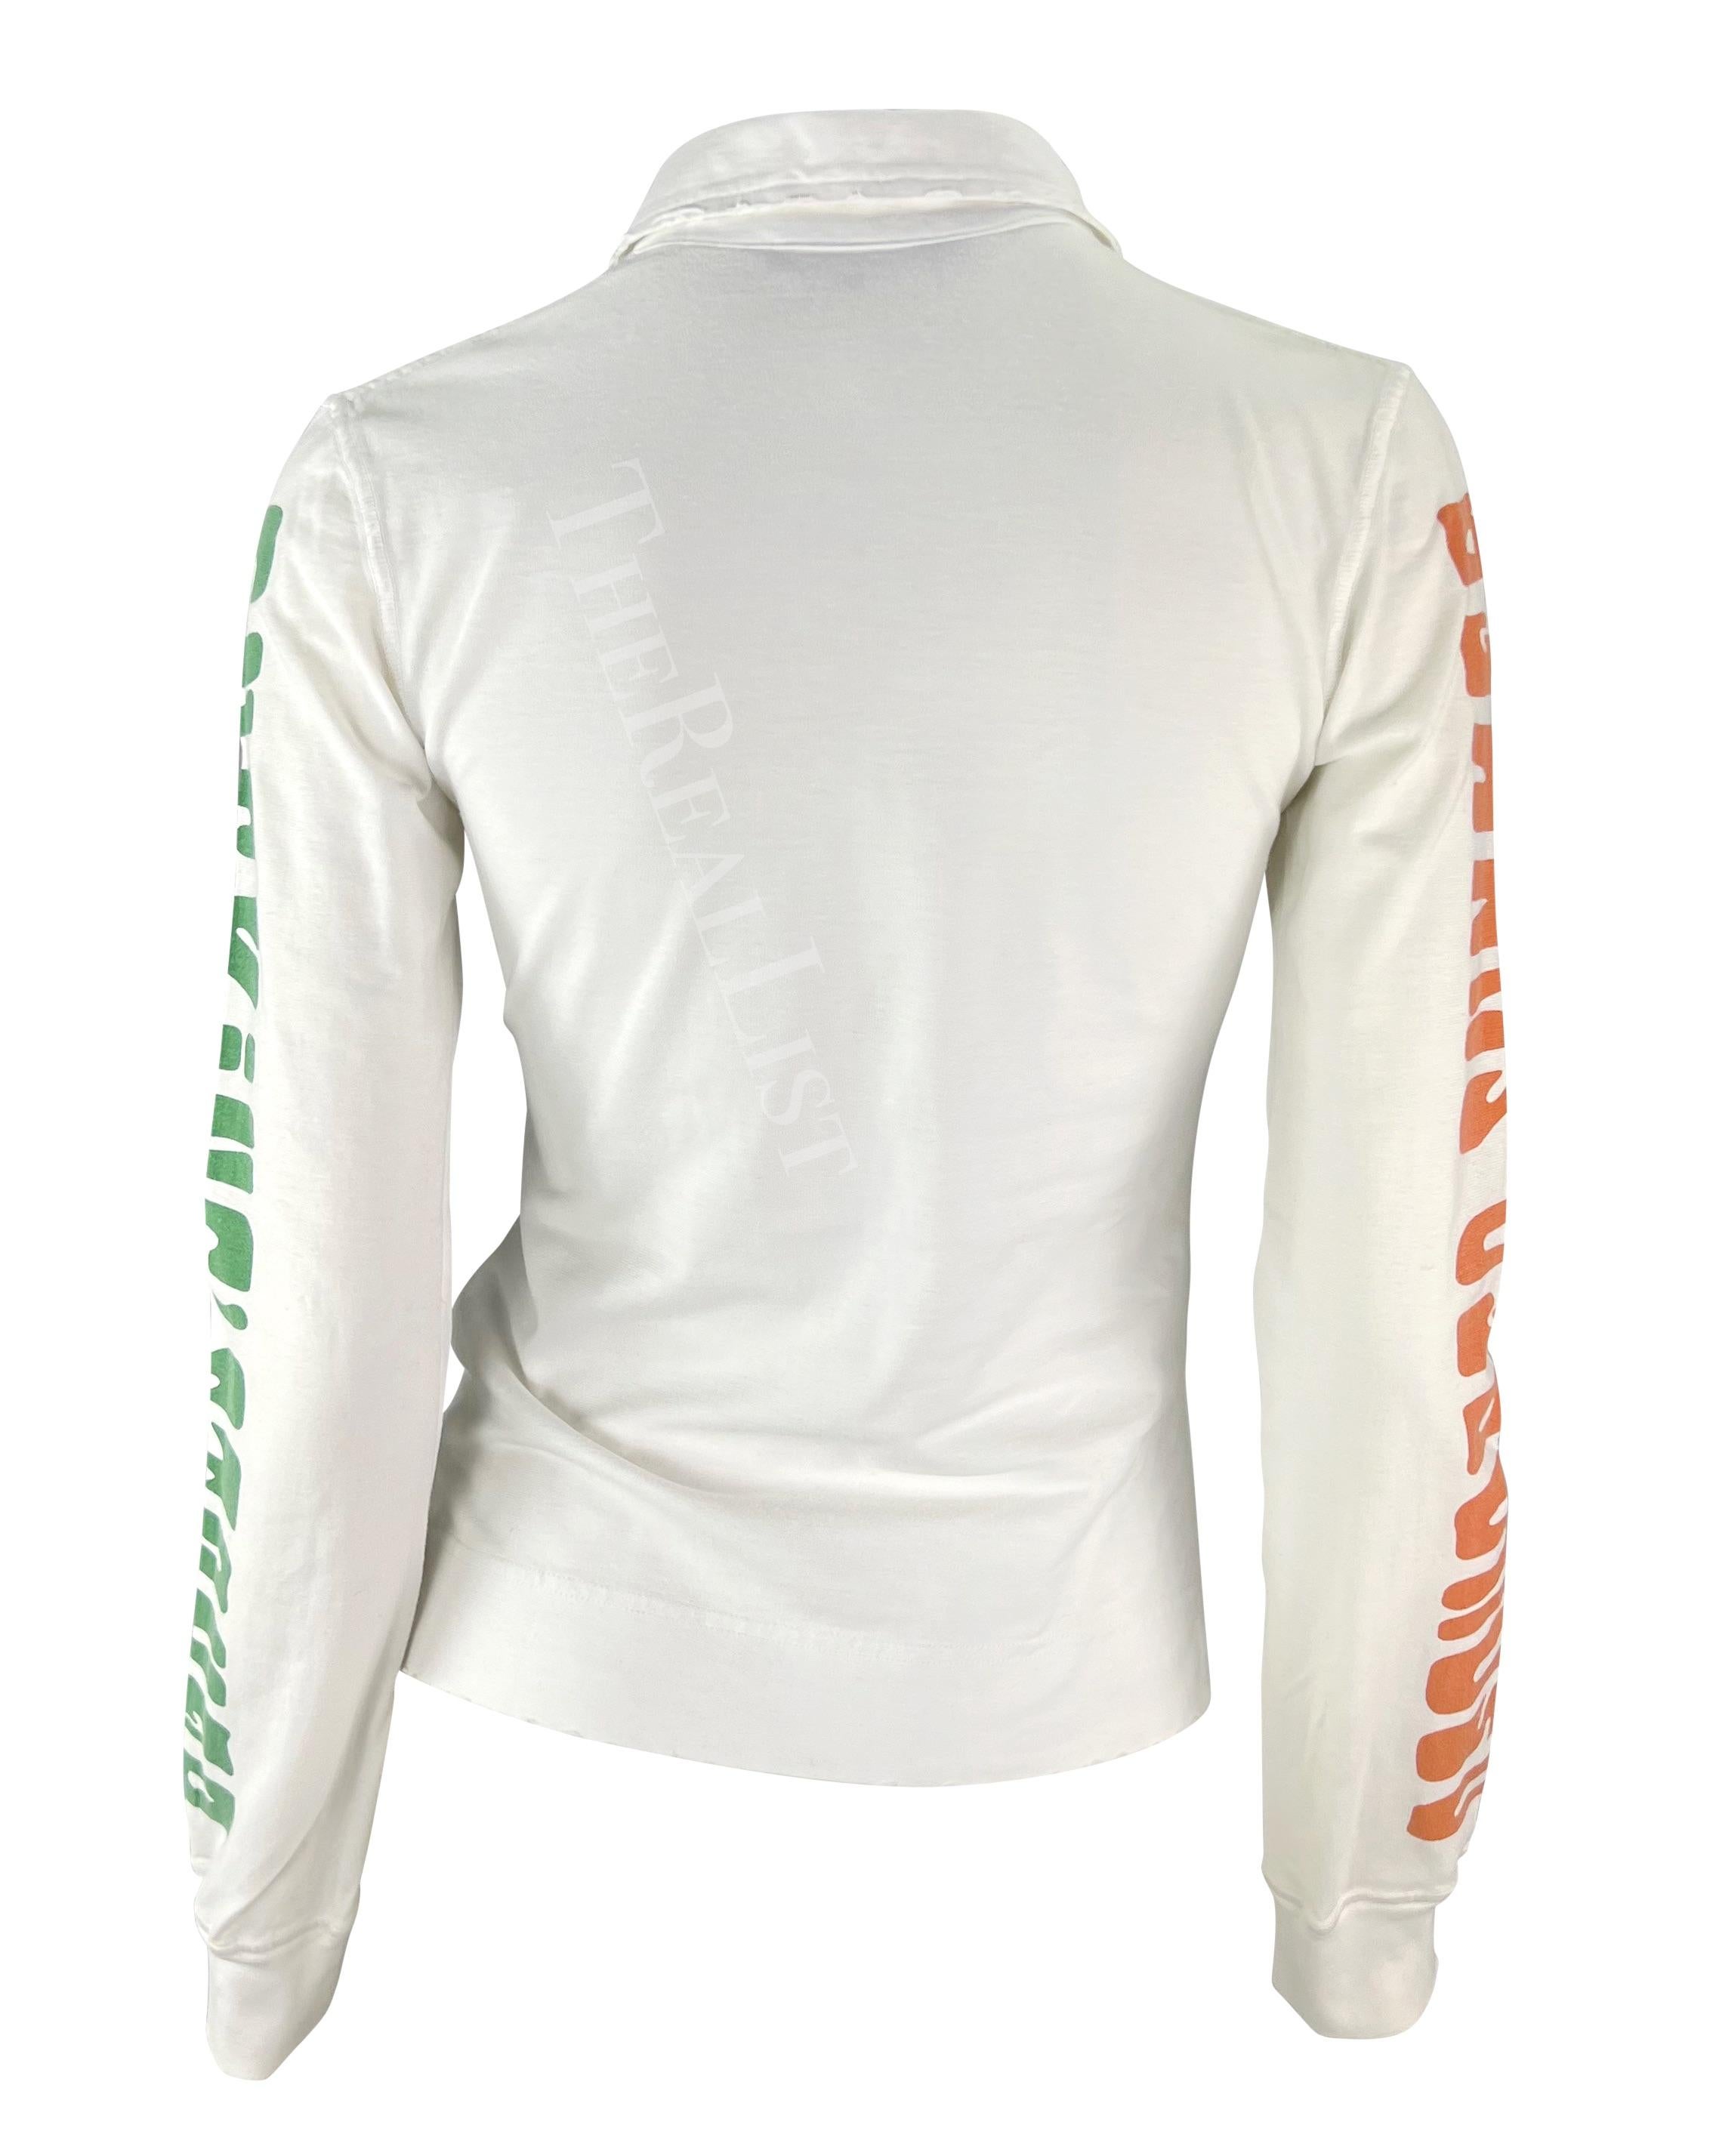 S/S 2005 Dsquared2  'Stoner' Marijuana Smoking White Distressed Rugby Polo Top  For Sale 3